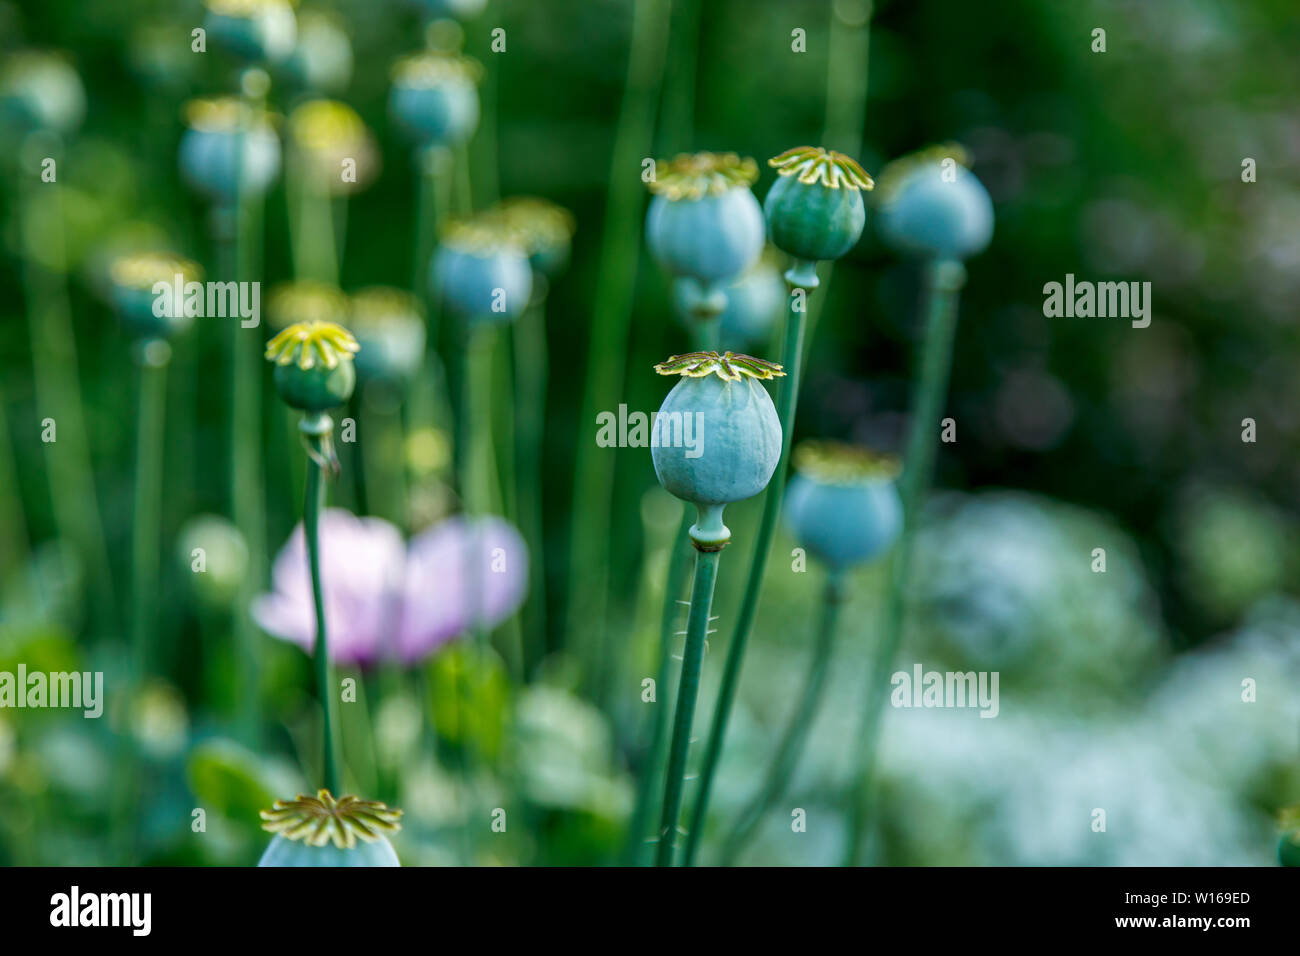 Close-up view of poppy (papaver) seed heads after flowering in a garden in Surrey, south-east England, UK Stock Photo